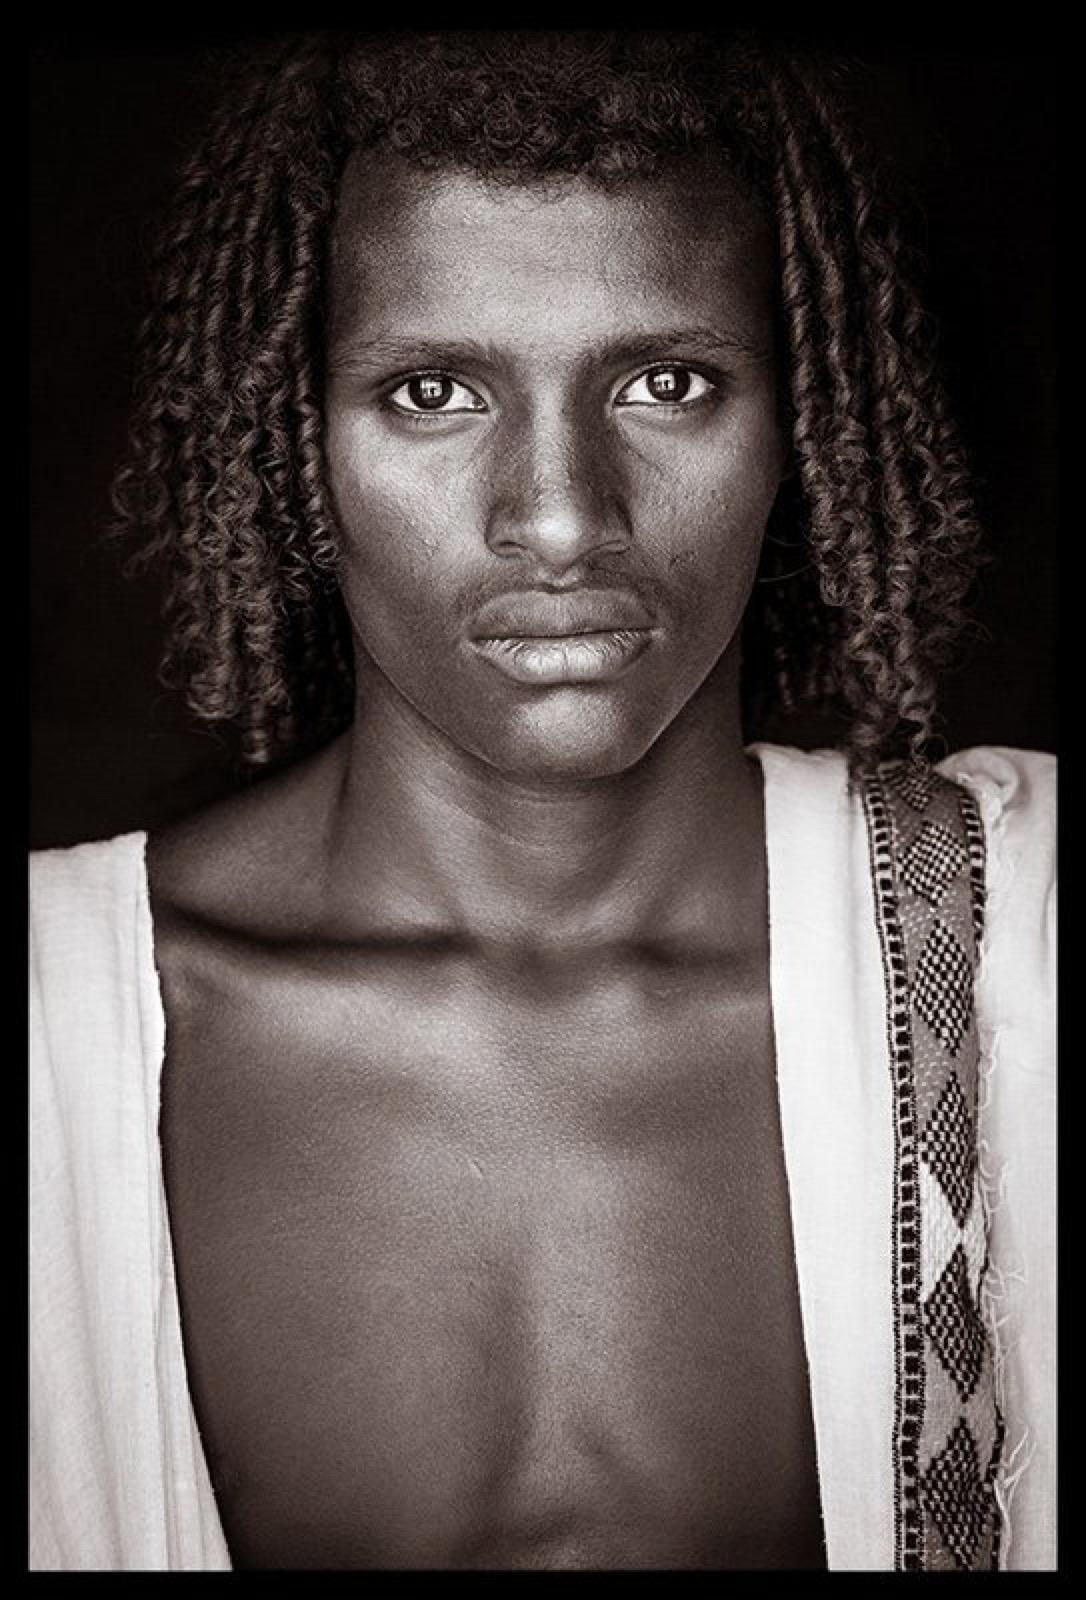 A young man of the Afar culture in the town of Assaita.  Many men spend the afternoons in loud debate in mud buildings and courtyards.  Often with fistfuls of miraa leaves (ghat) and cheeks filled with the drug. This socialising, lacking in any